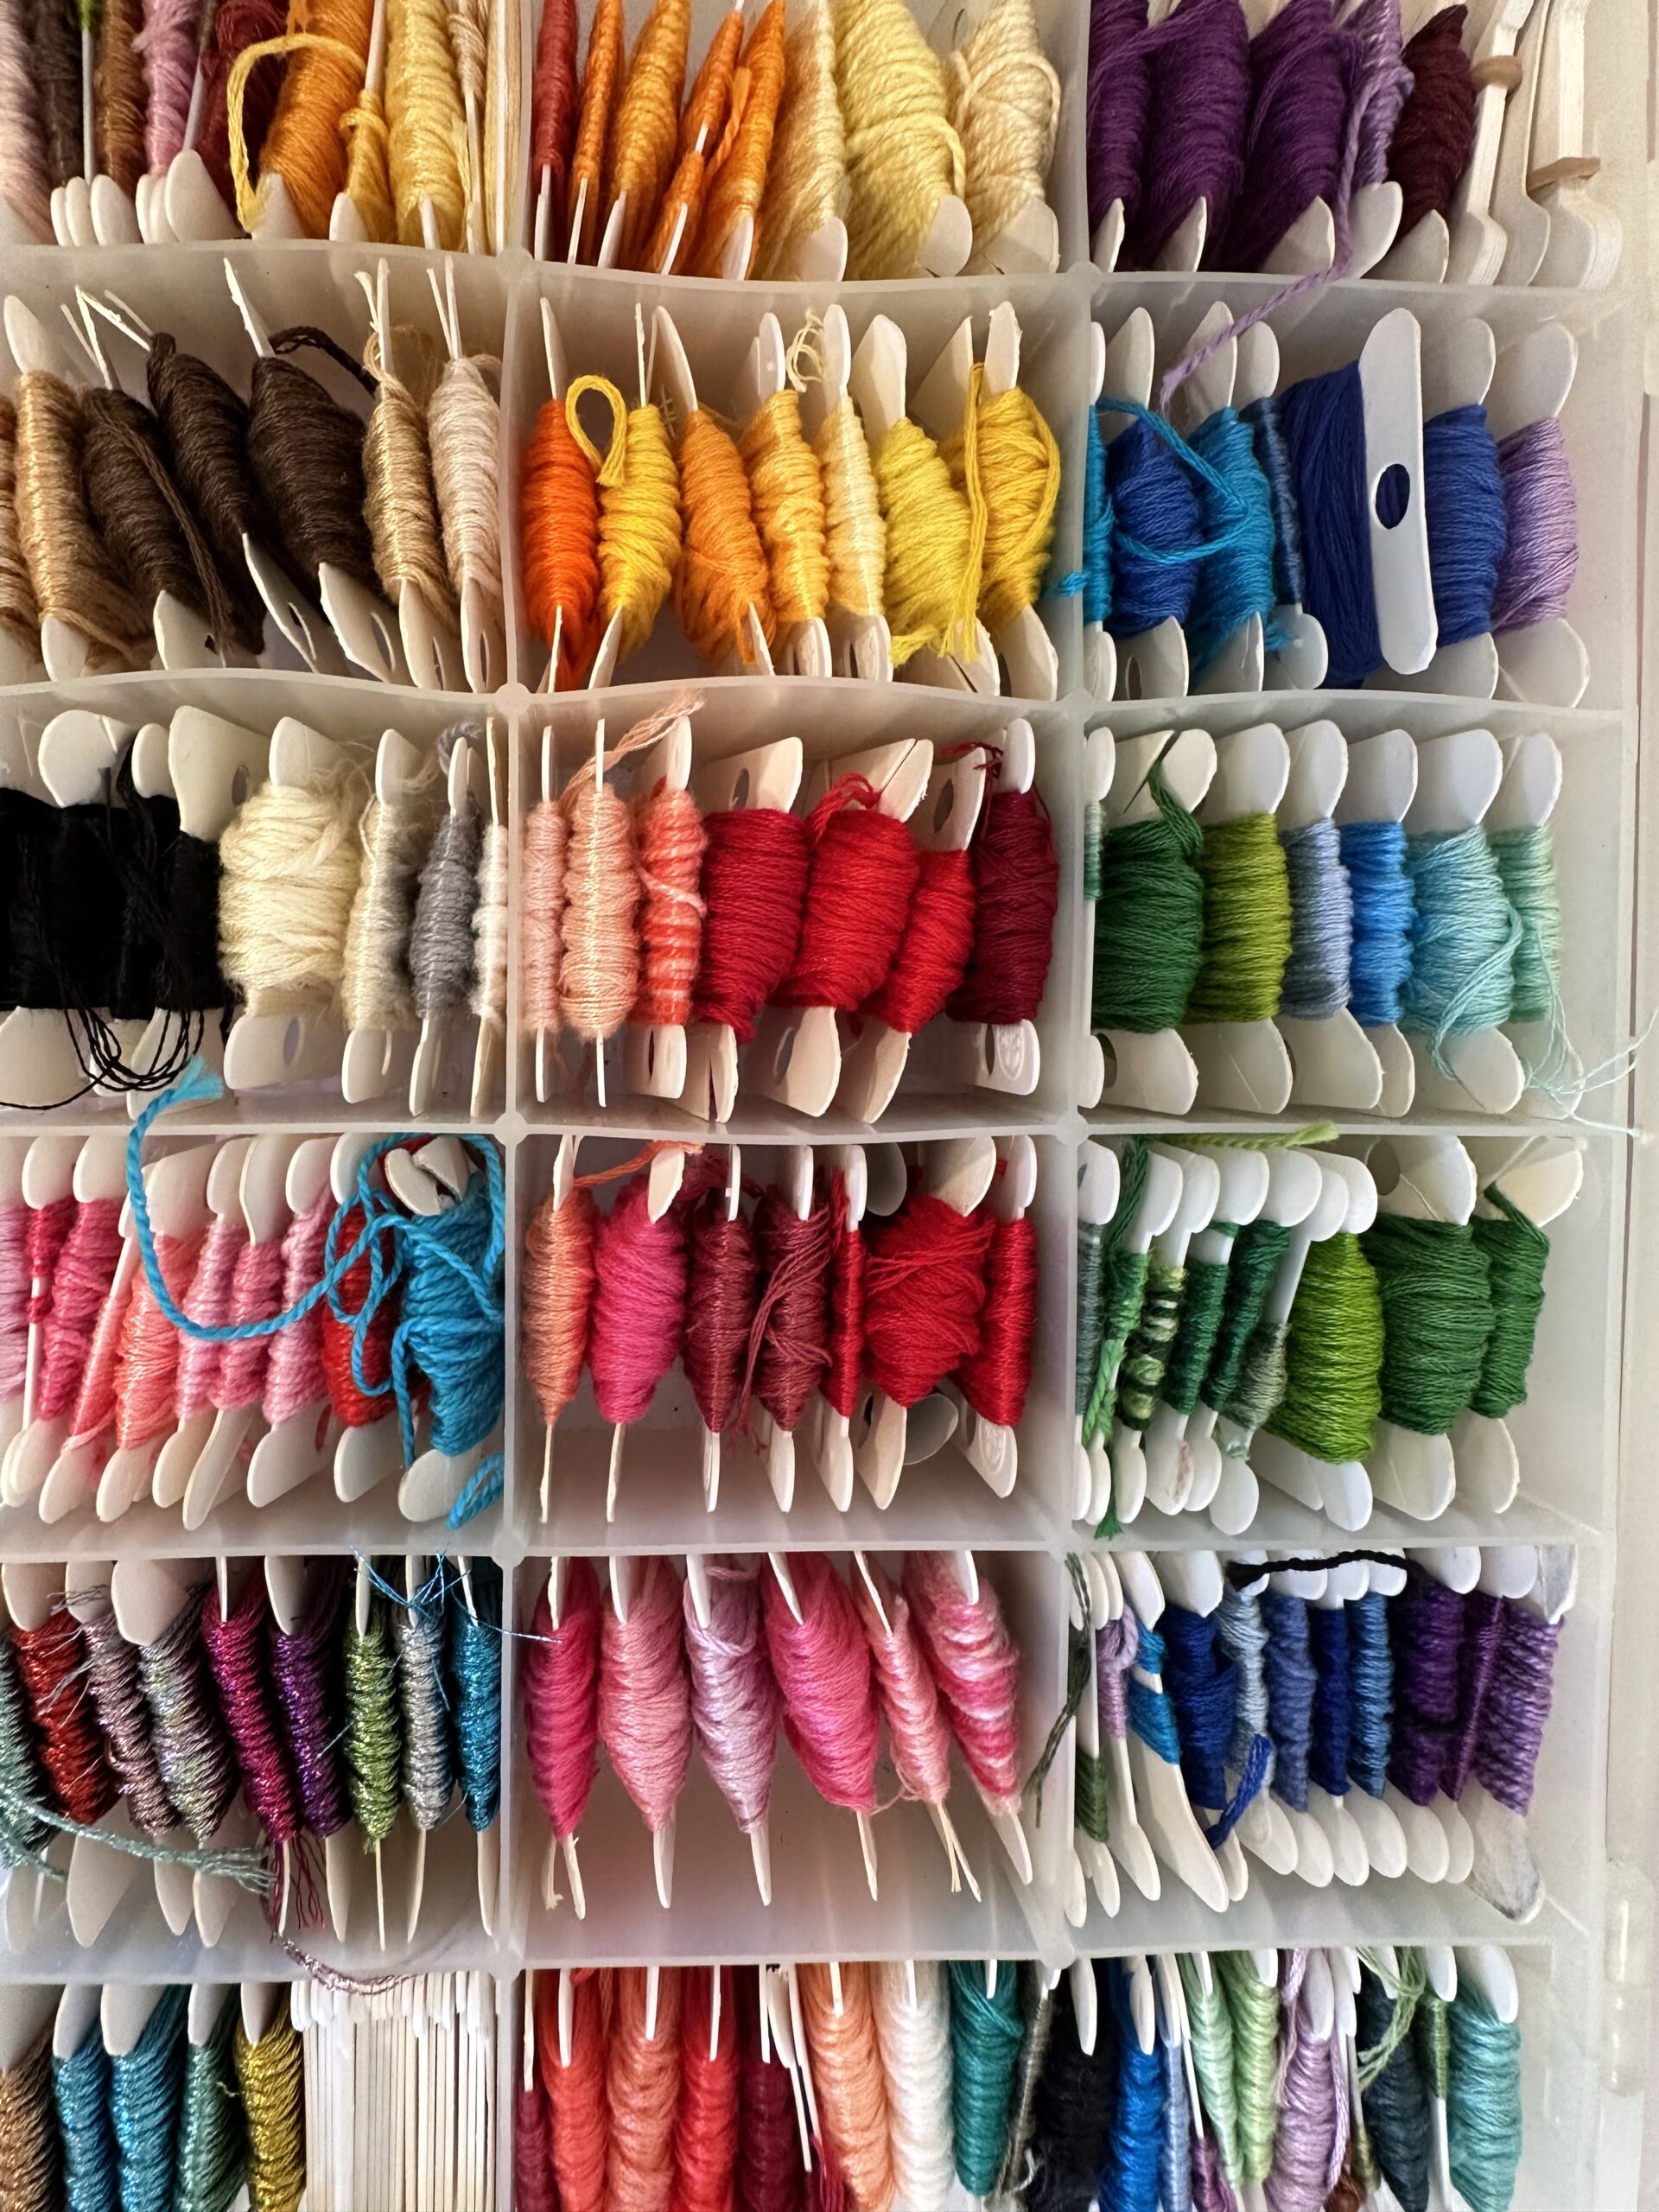 Overhead of a embroidery floss organizational tray with different colors of wound floss on bobbins